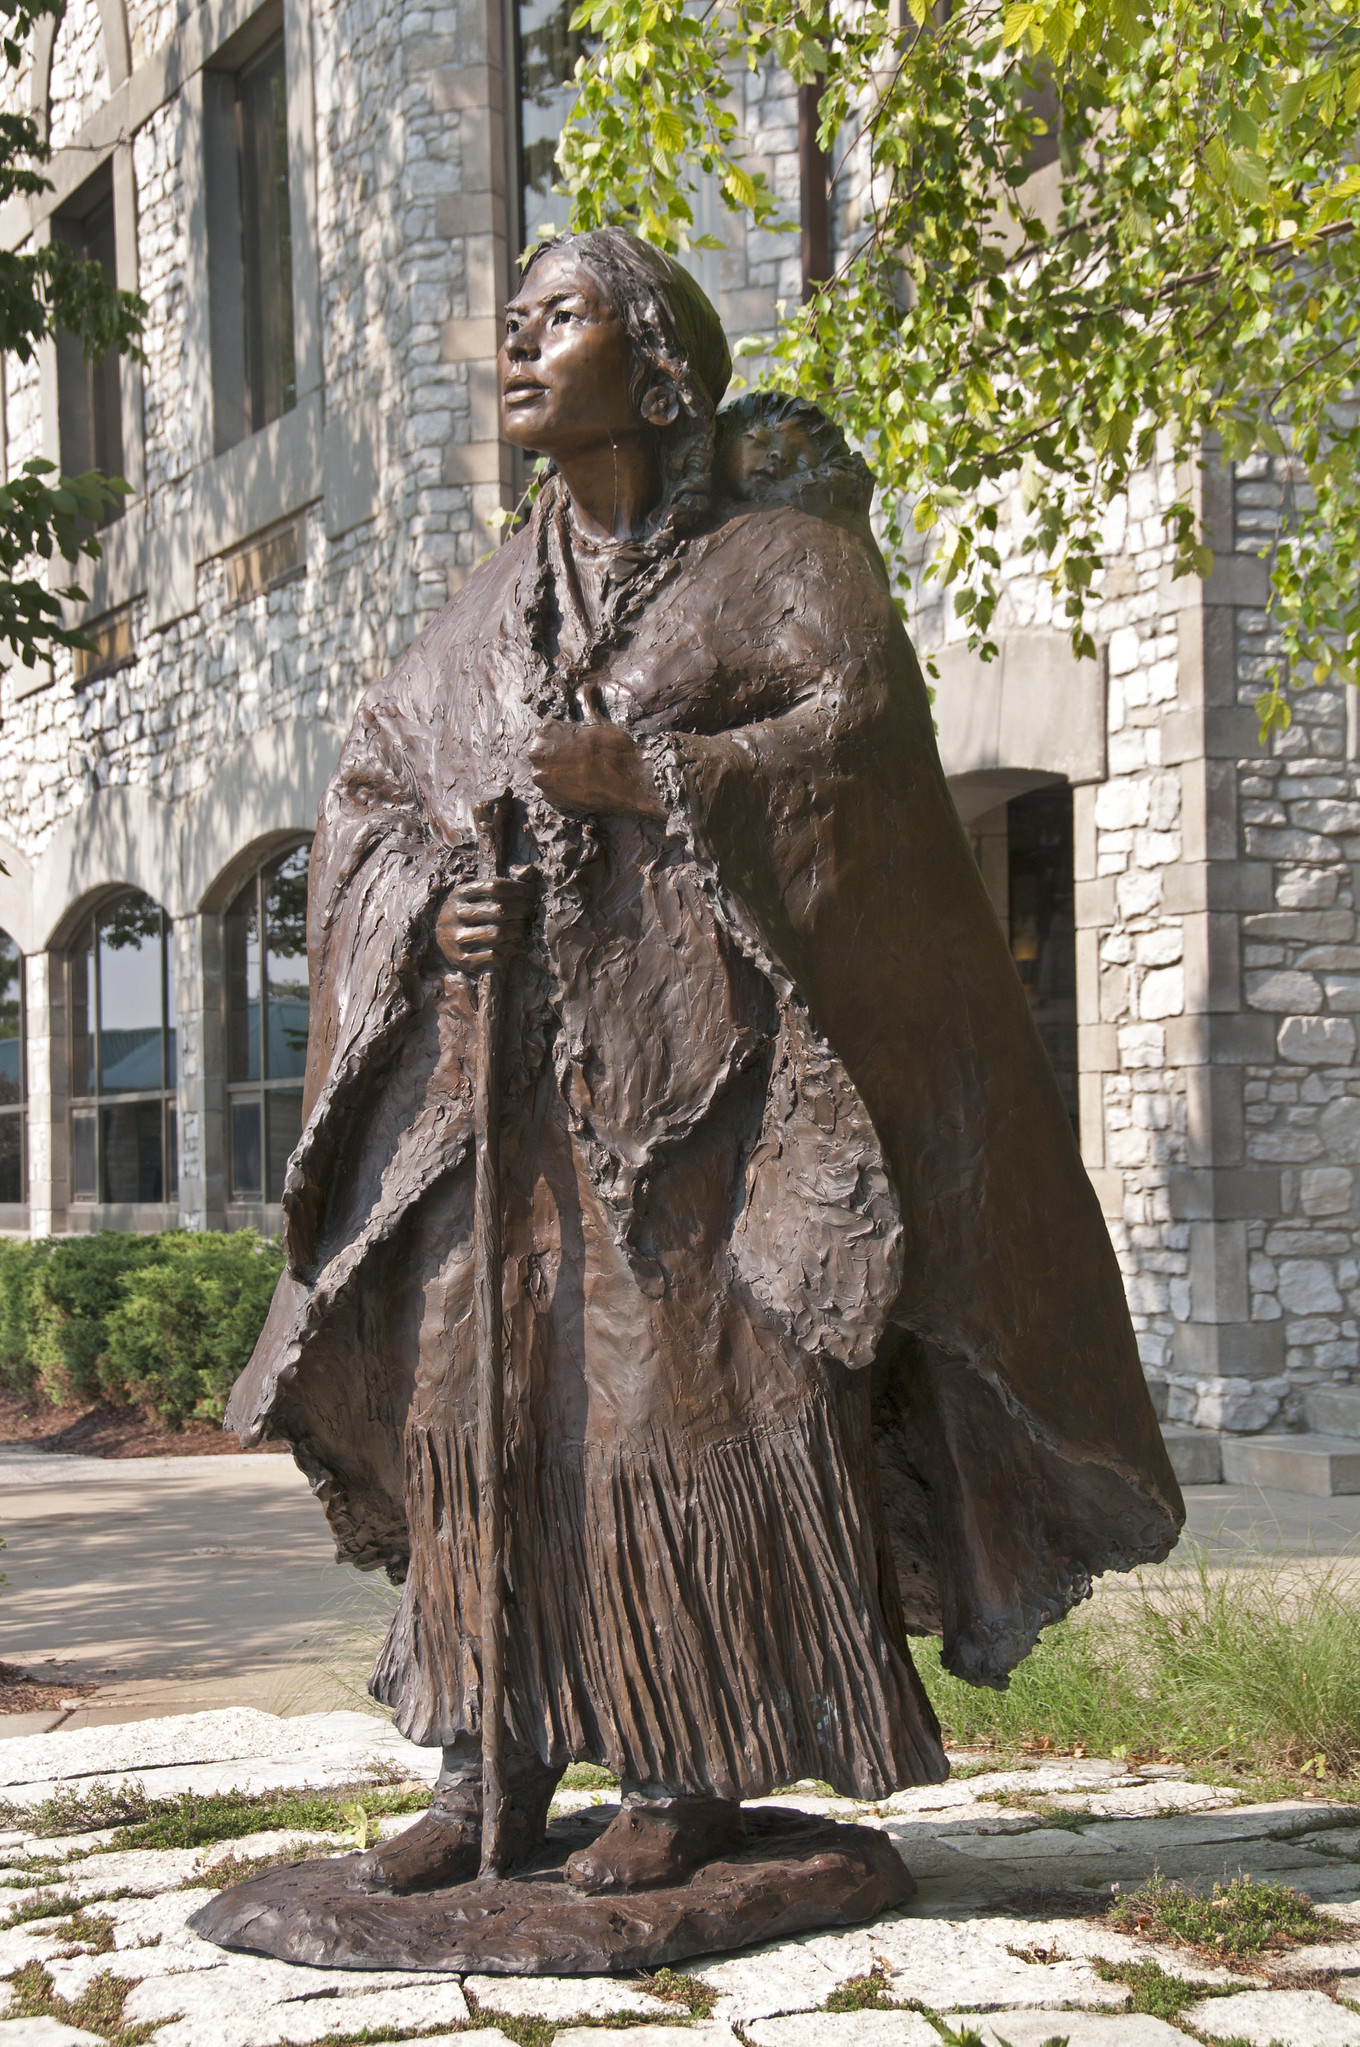 A 7 ft. tall bronze sculpture of a Lemhi Shoshone woman, Sacagawea, in Indigenous attire, standing with a walking stick and a child strapped to her back.